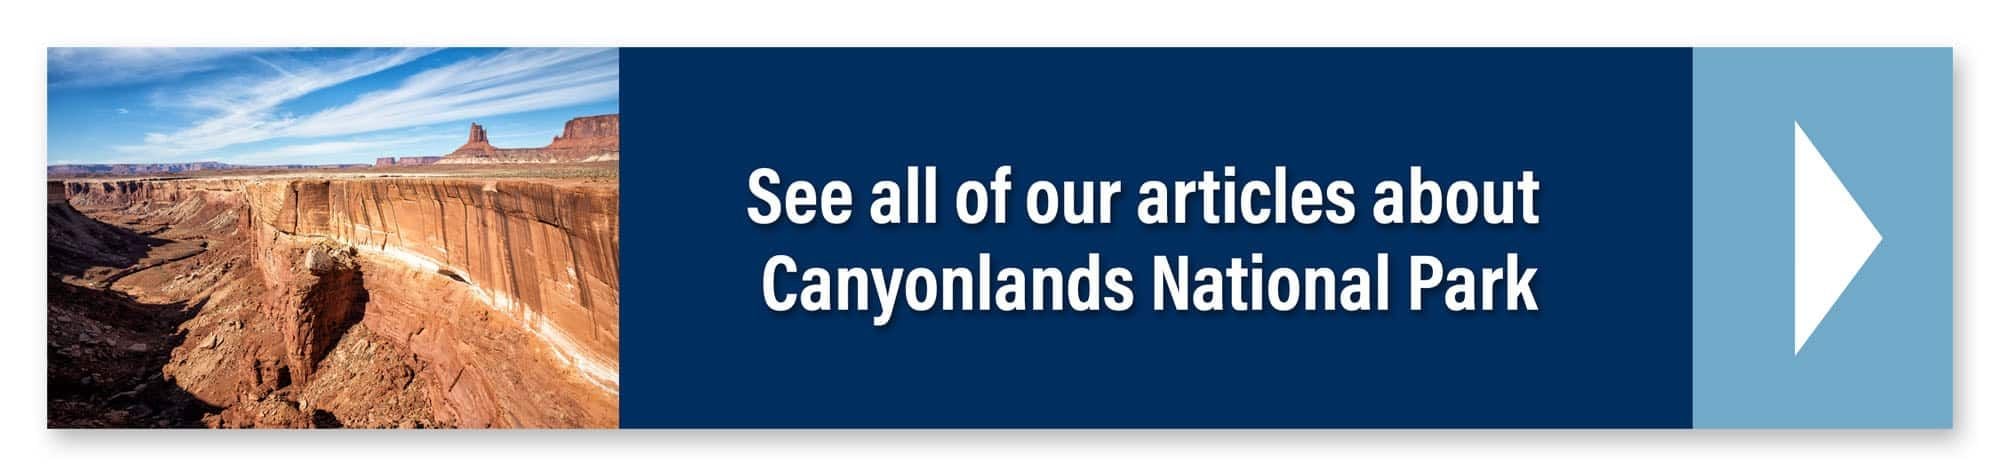 Canyonlands Travel Guide